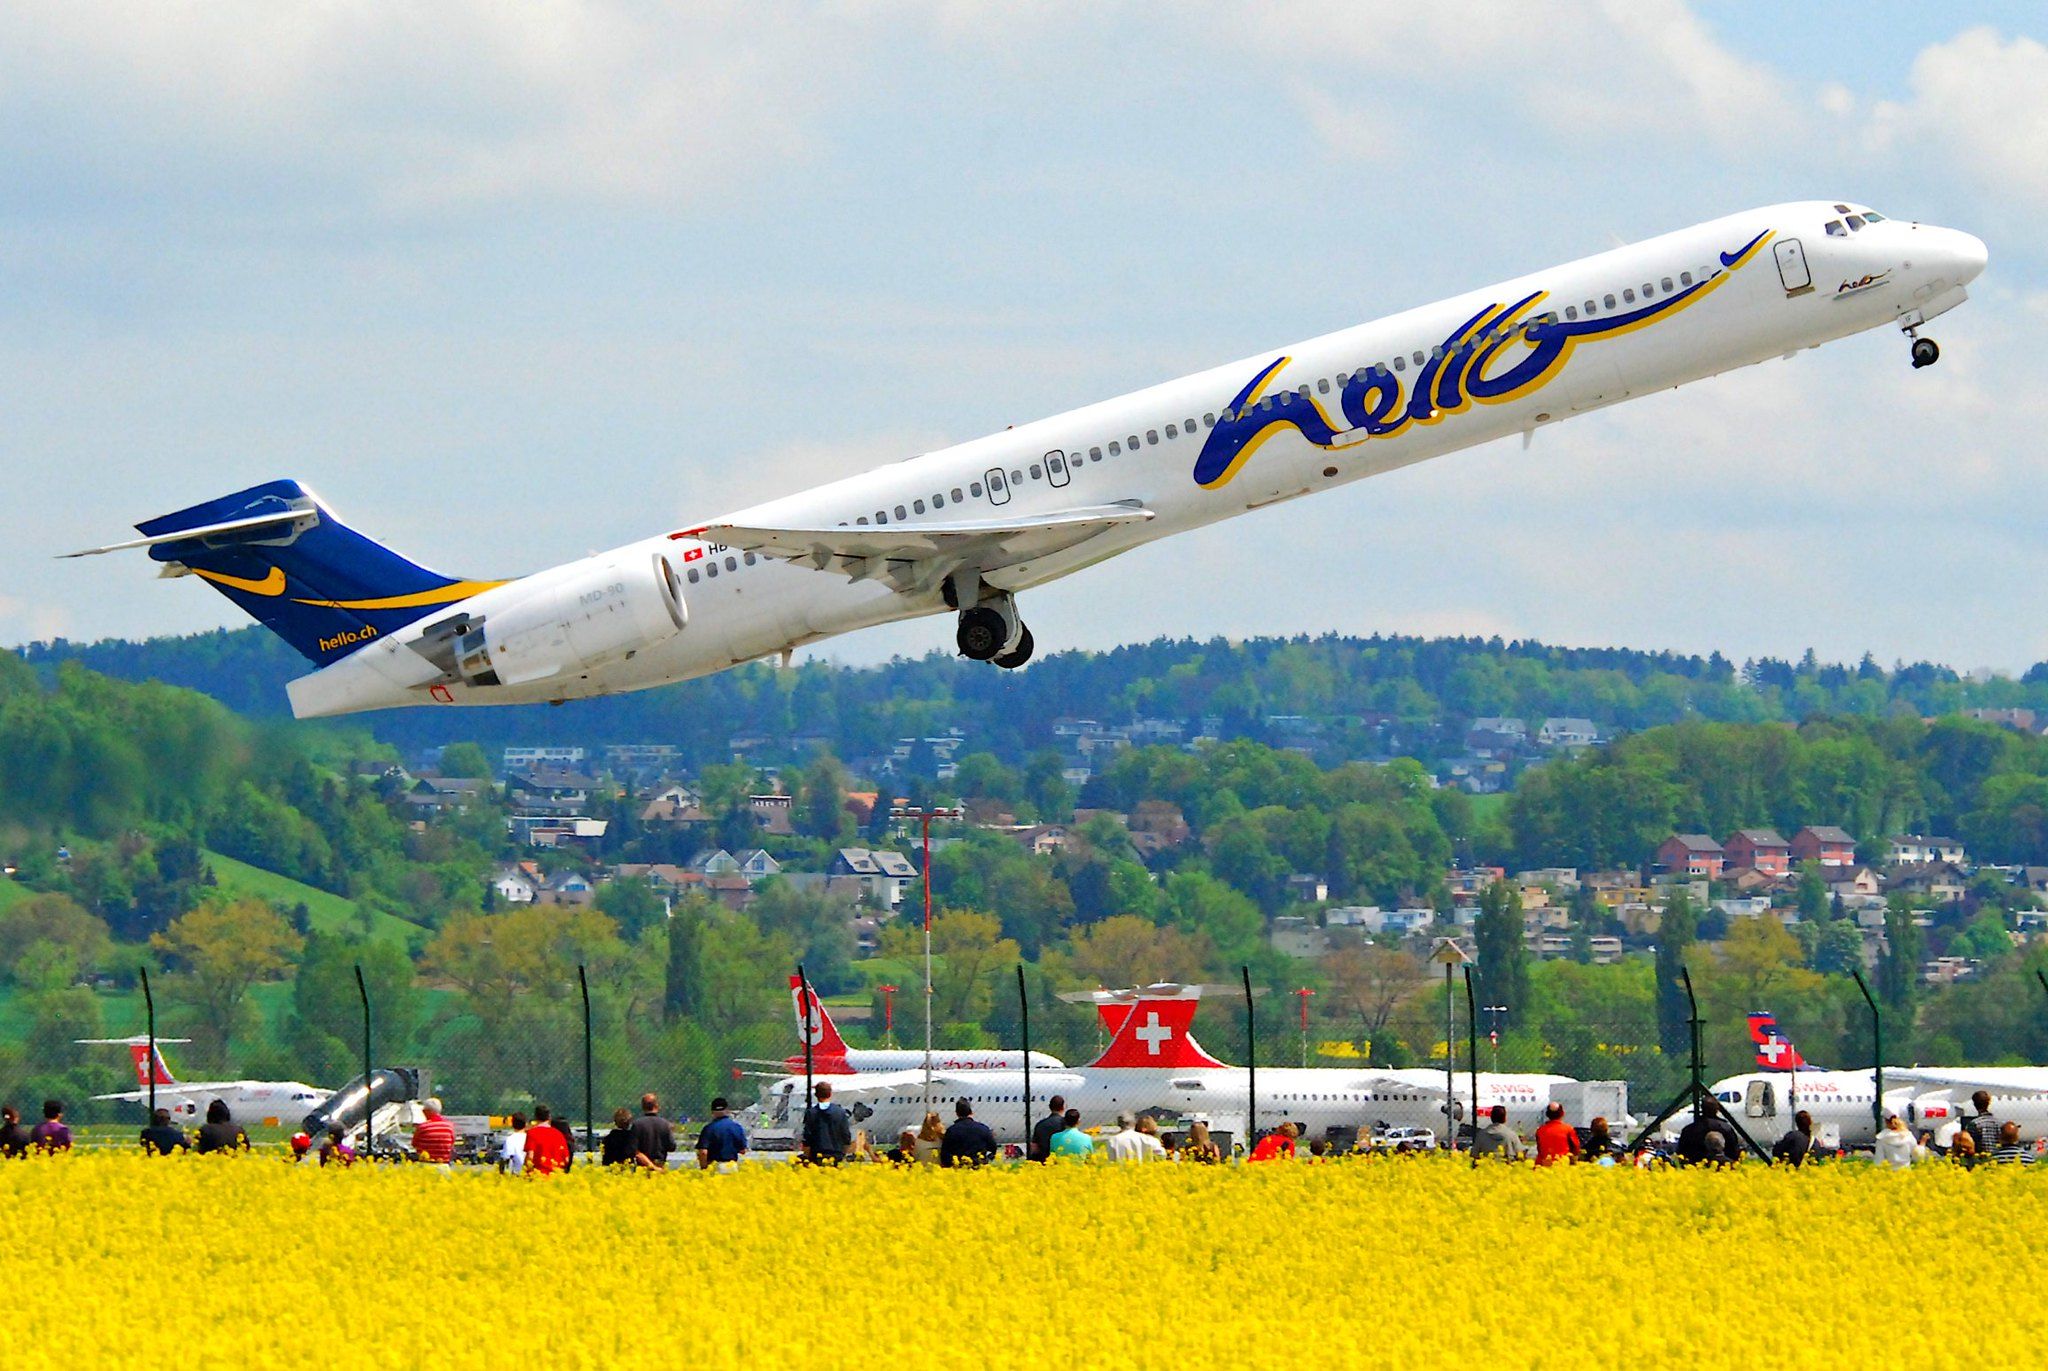 Hello Airlines MD-90 taking off, with many SWISS aircraft parked in the background.